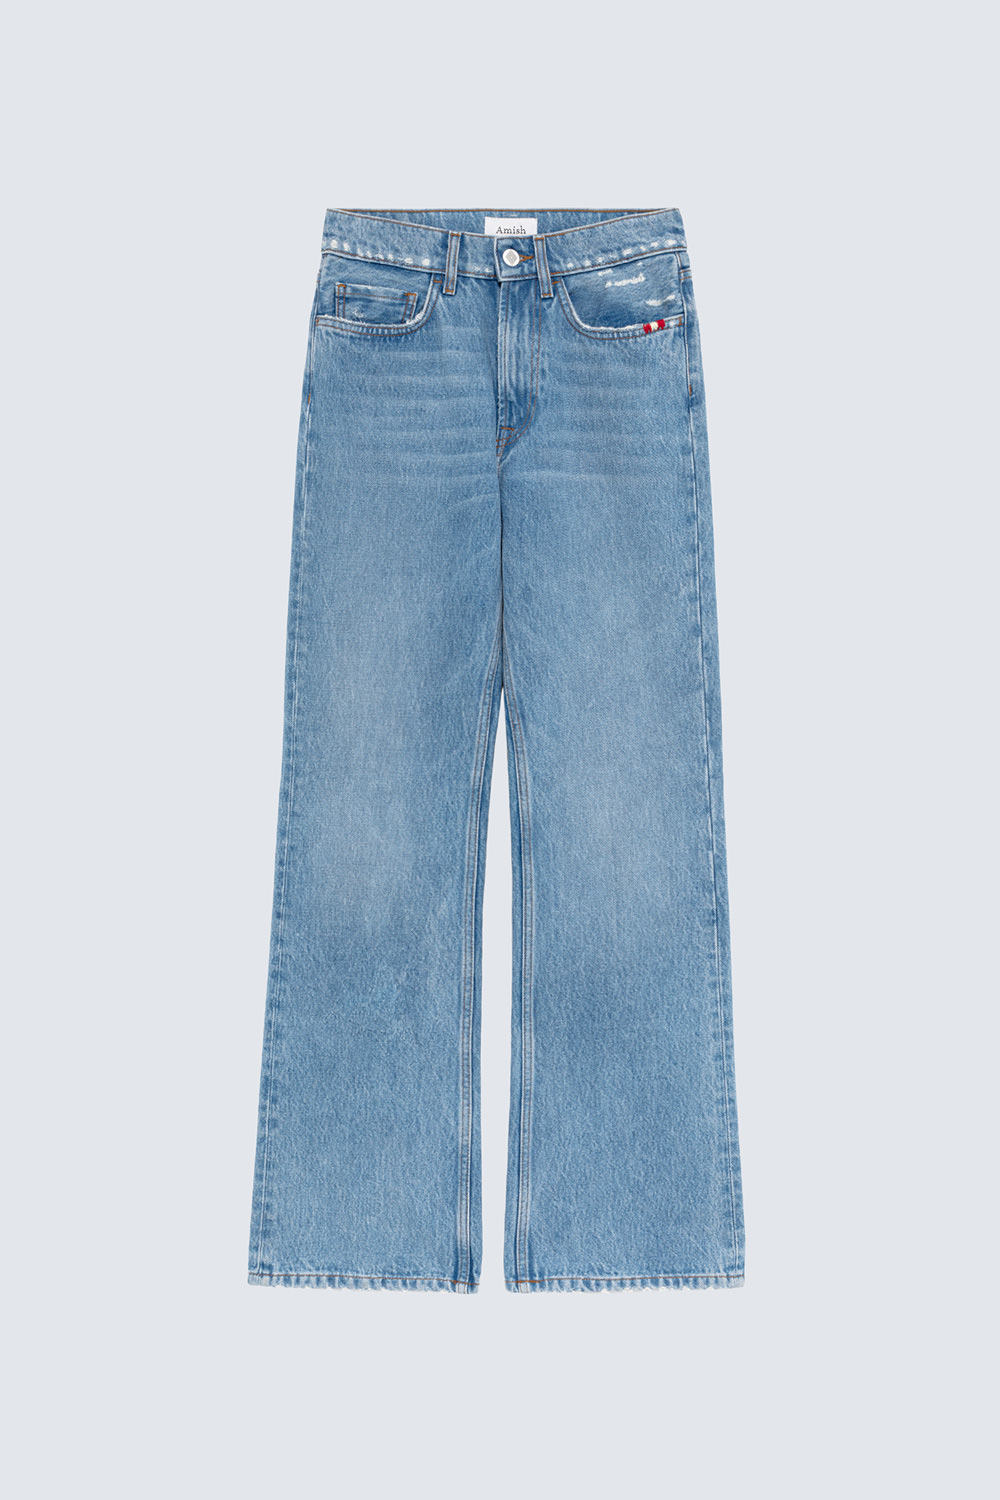 AMISH: JEANS KENDALL SUMMERTIME